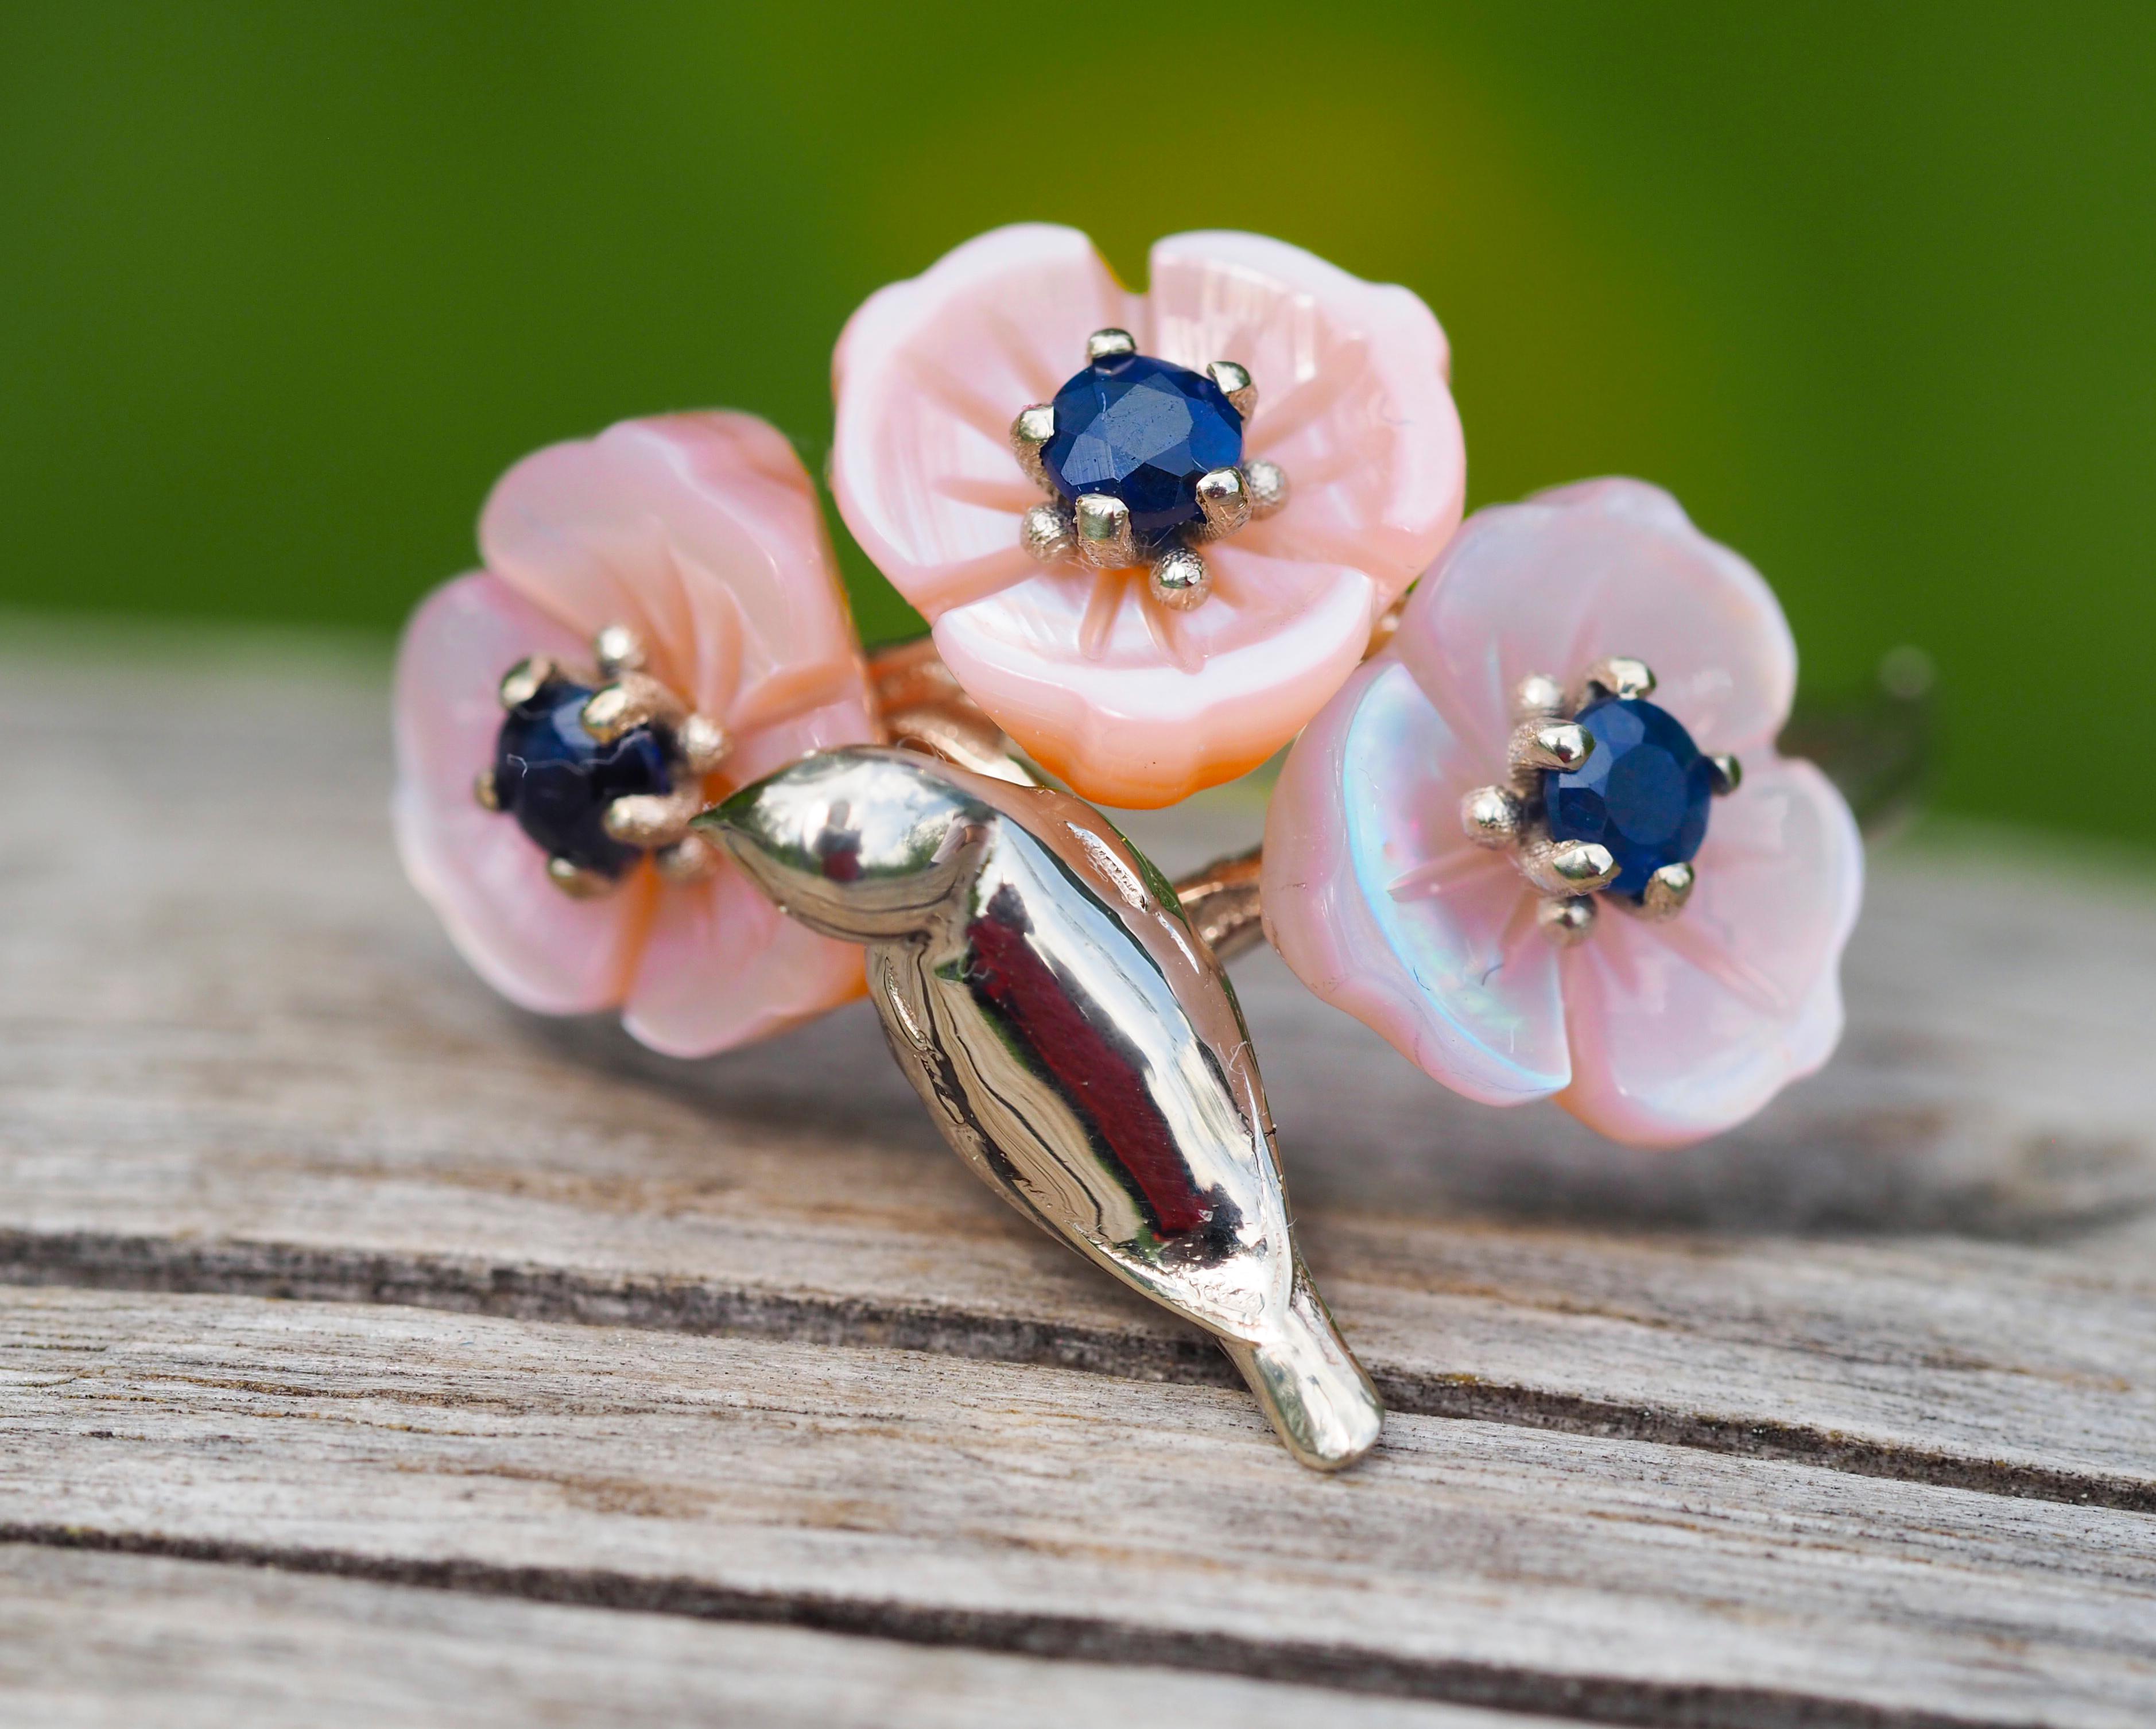 For Sale:  14k Gold Bird on Branch Ring. Sapphires and Carved Mother of Pearl ring! 11